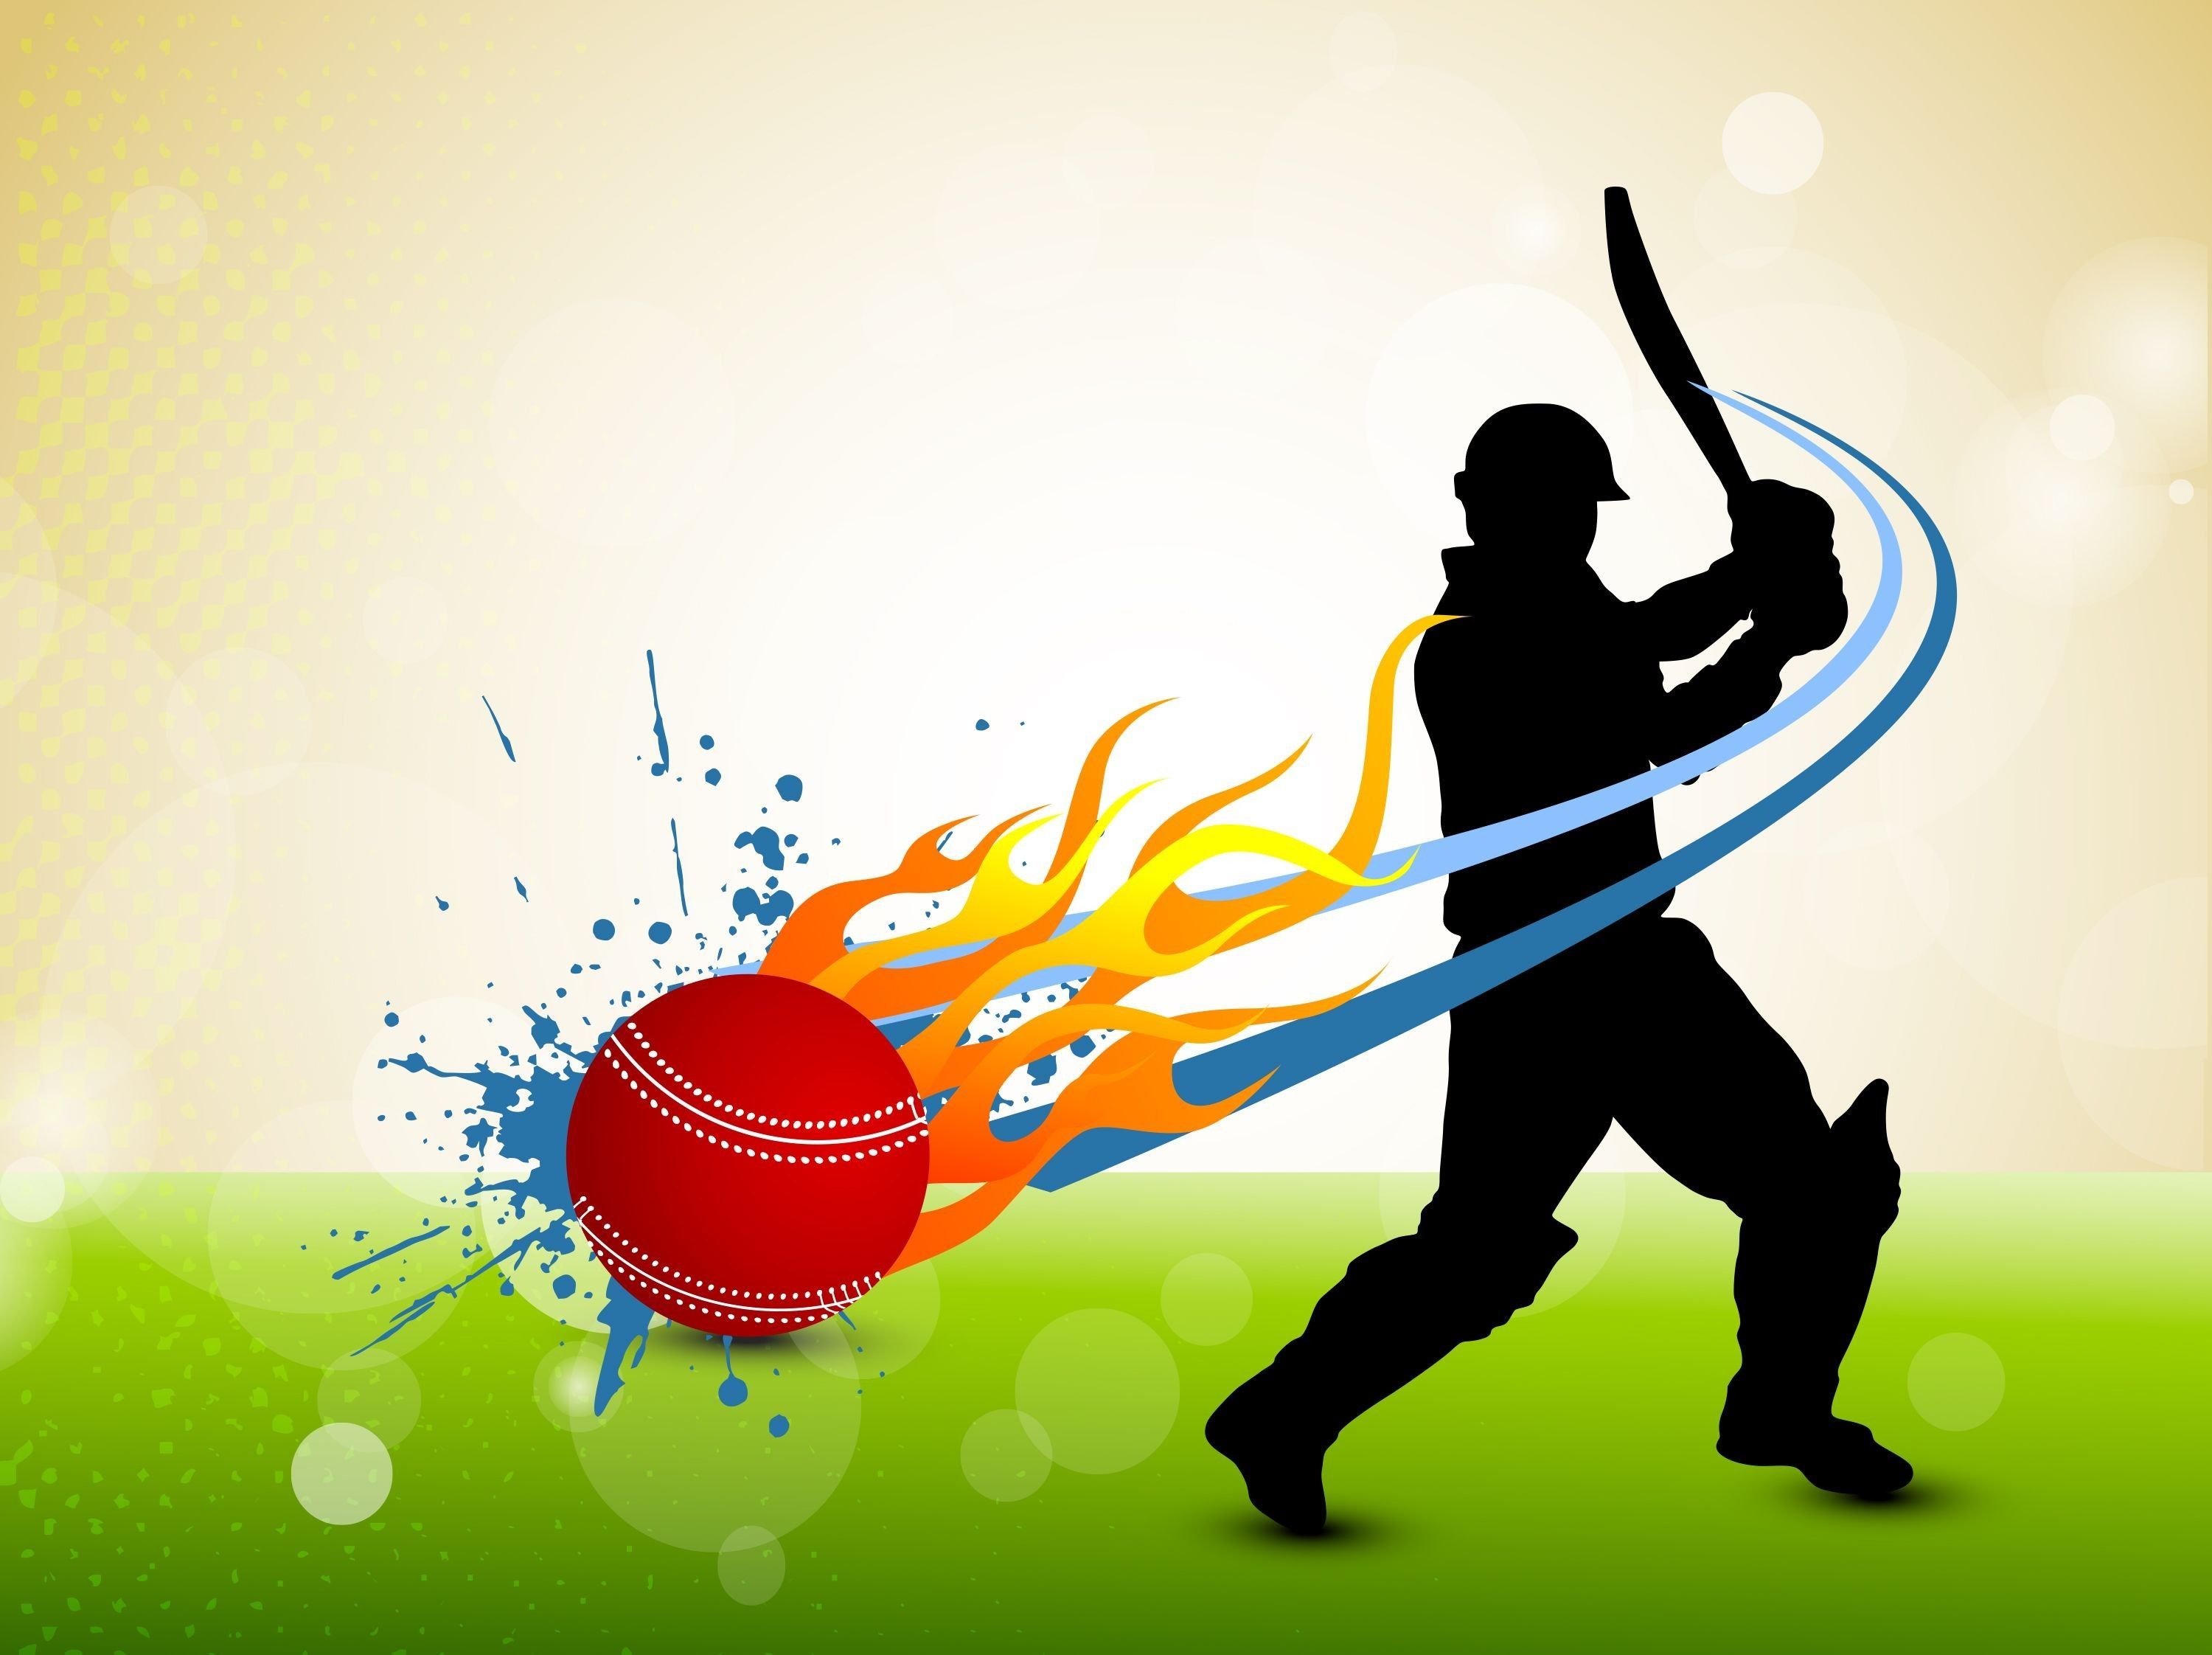 Free Vector  Green cricket sports background with illustration of players  and golden trophy cup